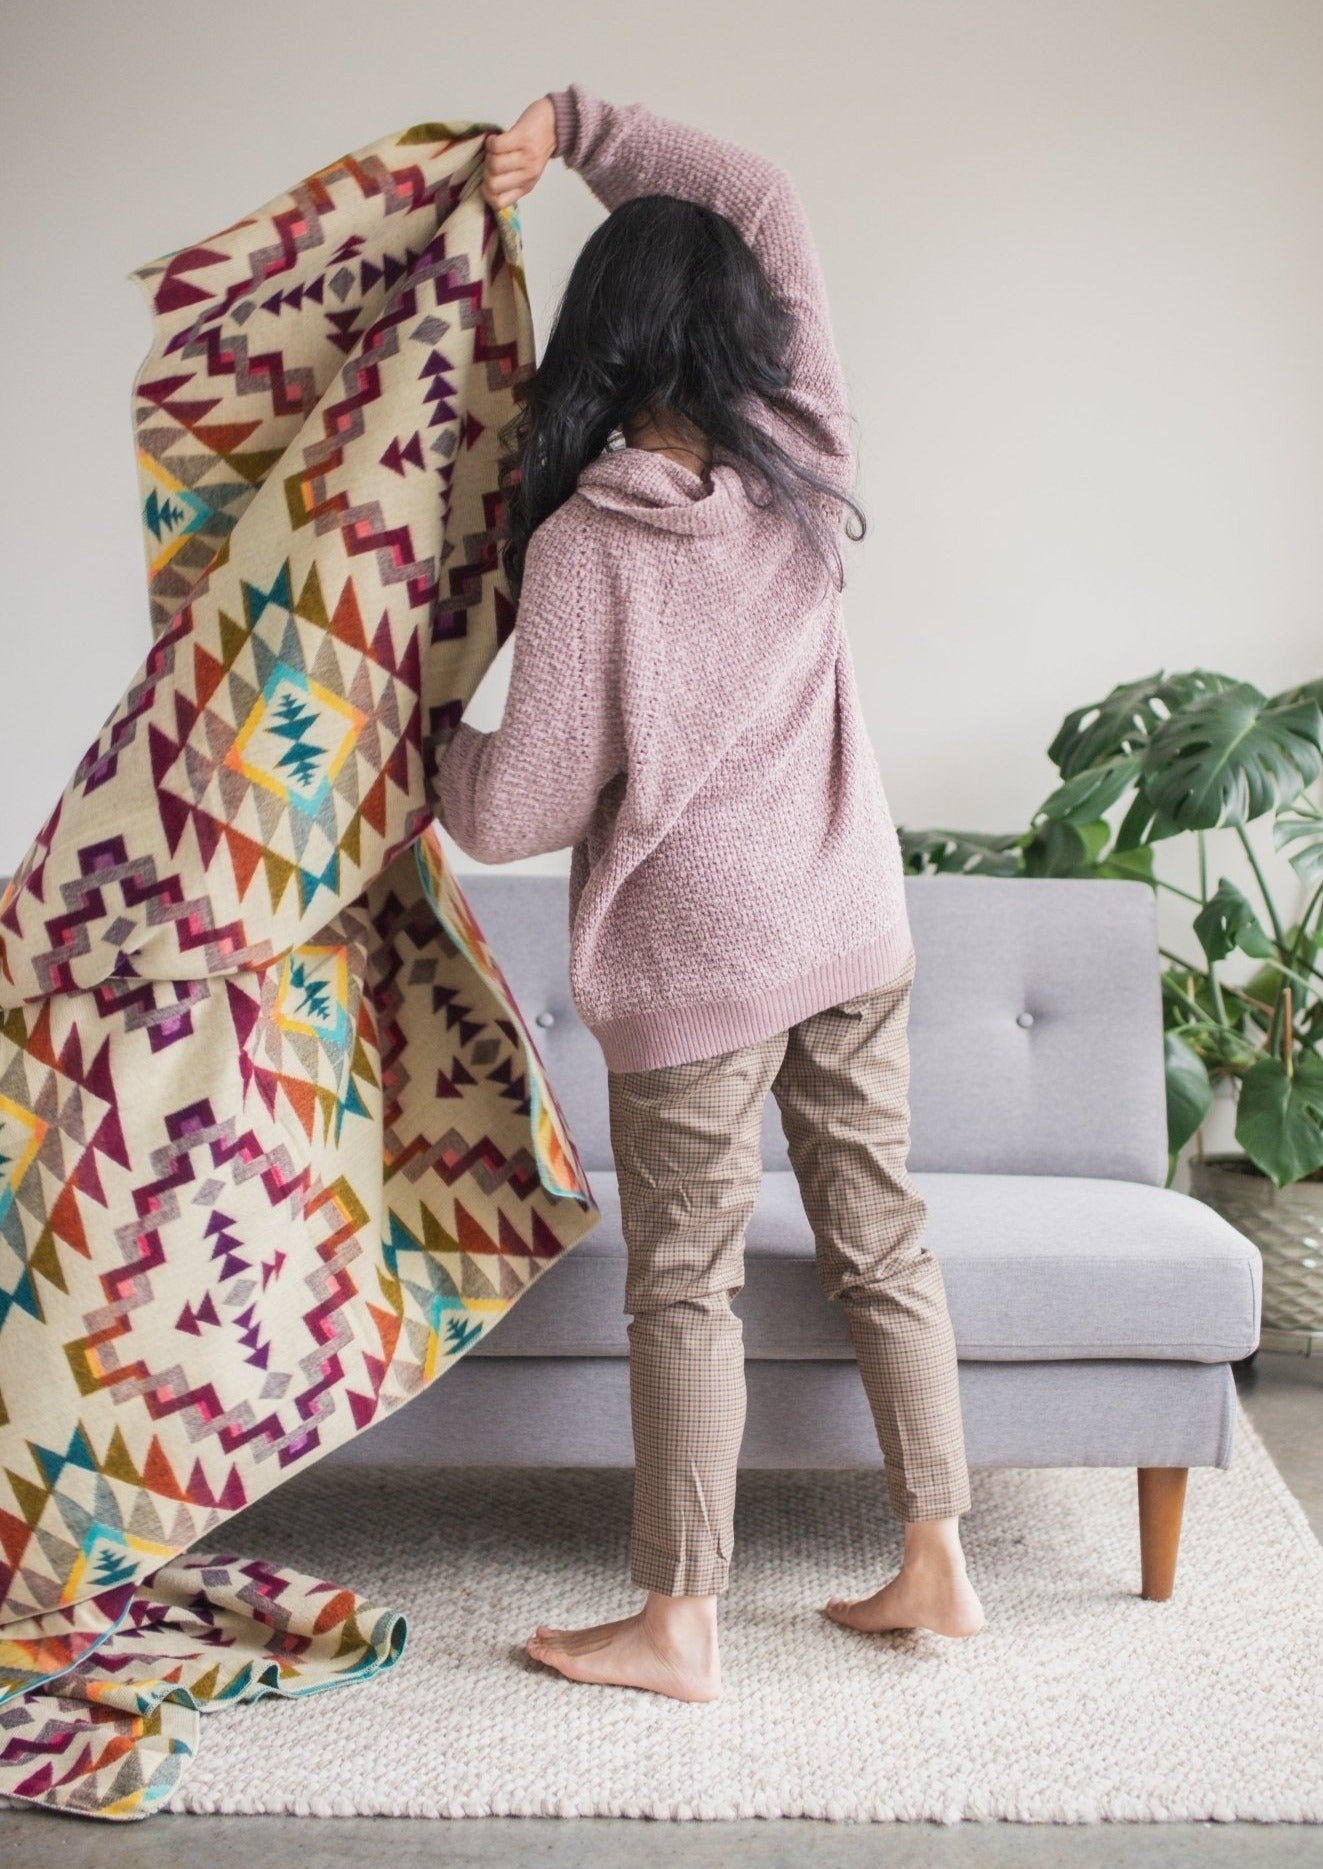 Asian girl is standing in her living room wearing comfy clothes on a sunday. she is in motion about to wrap her self up to get cozy. she shows off reverse side of alpaca blanket 